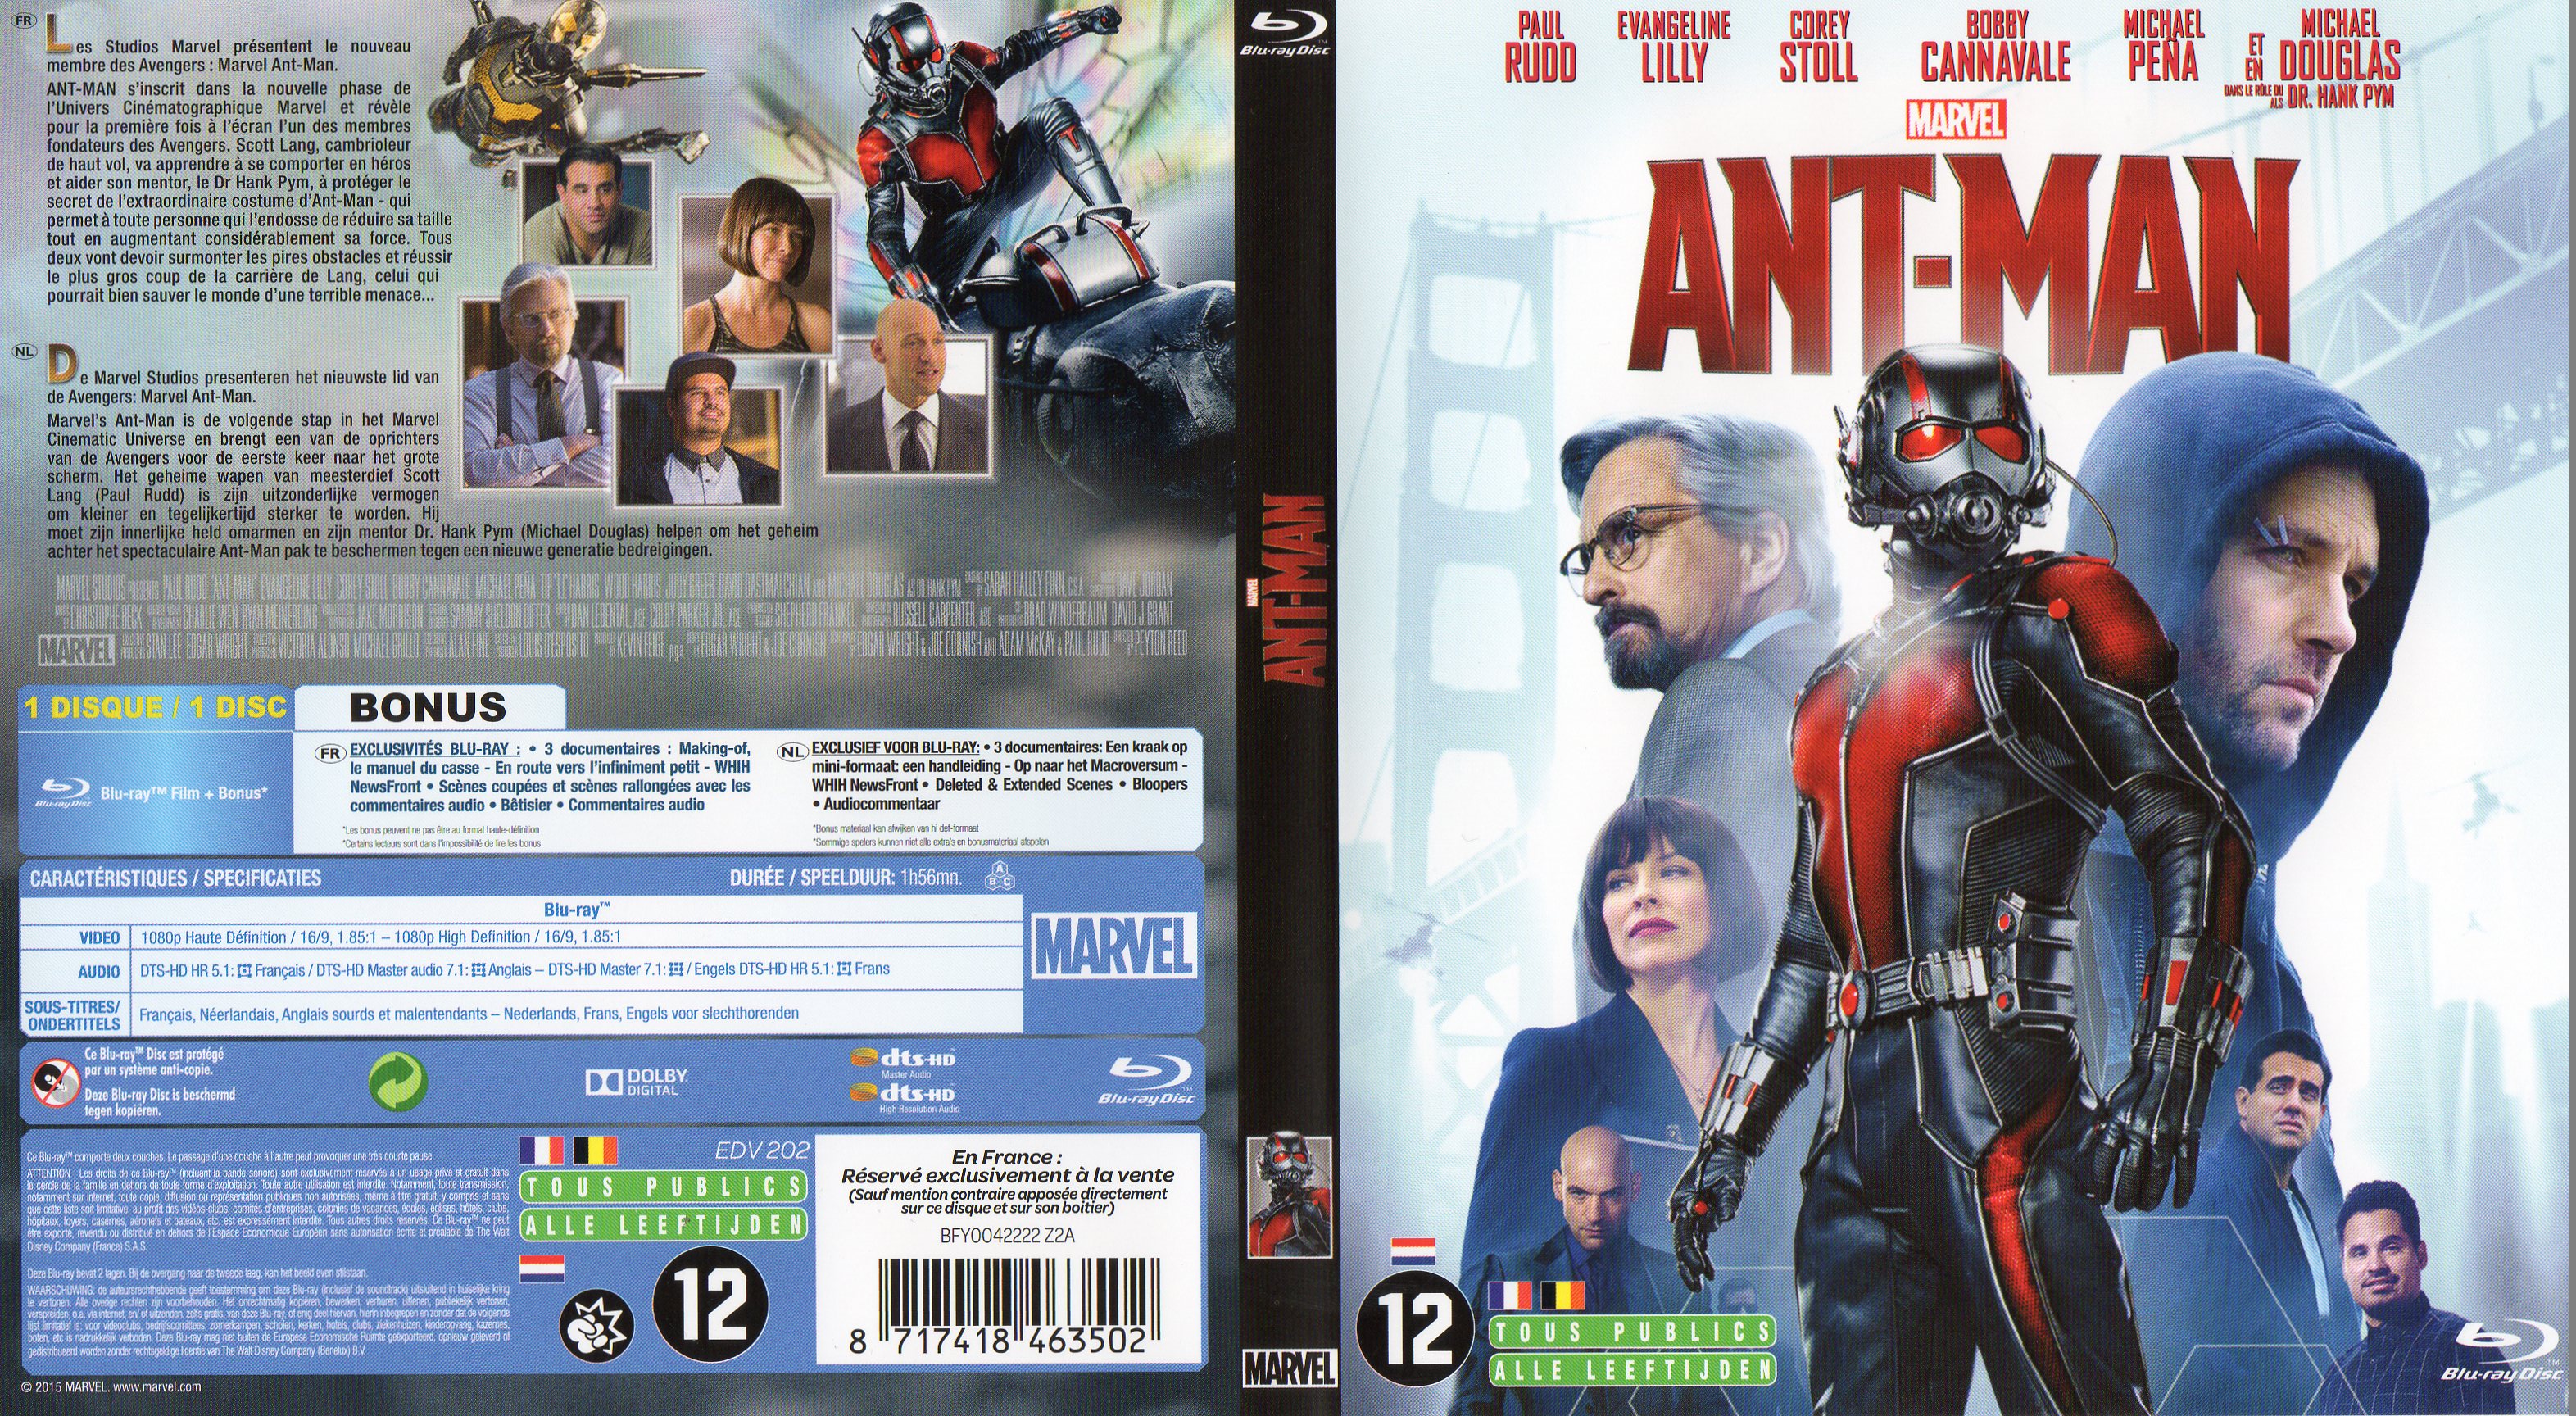 Jaquette DVD Ant-man (BLU-RAY)